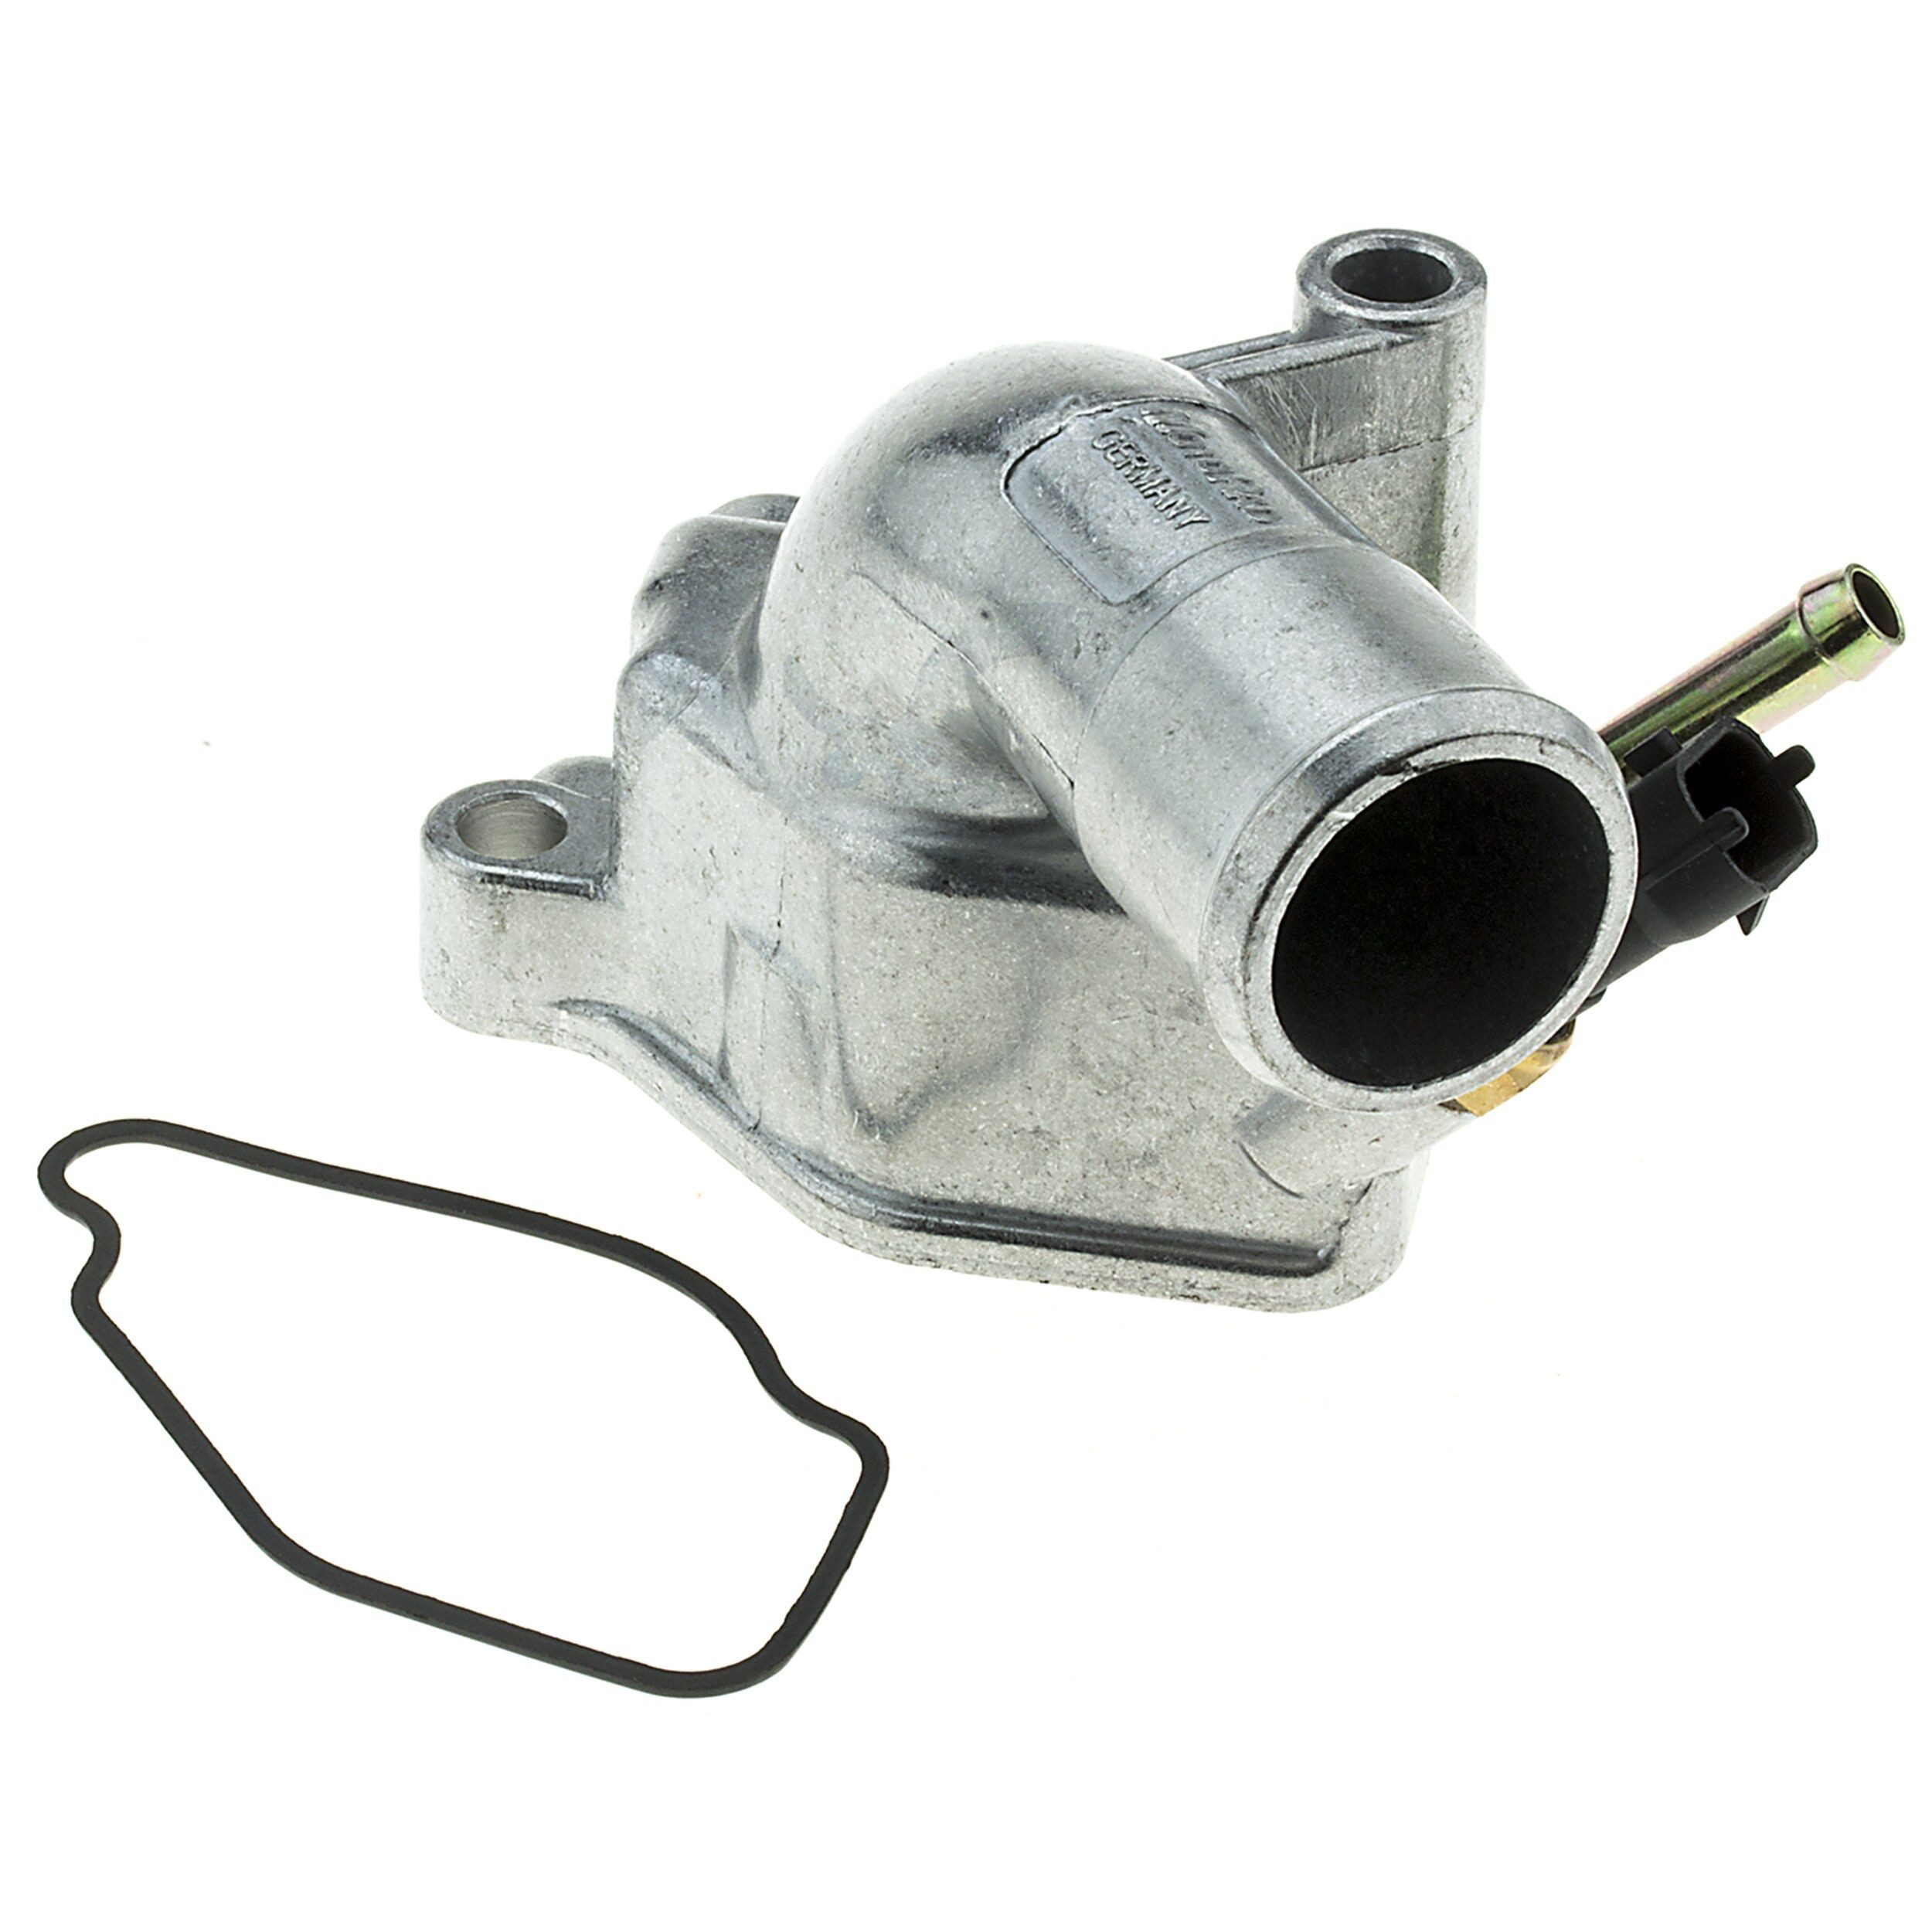 MOTORAD 541-1-92K Engine thermostat Opening Temperature: 92°C, with gaskets/seals, with housing